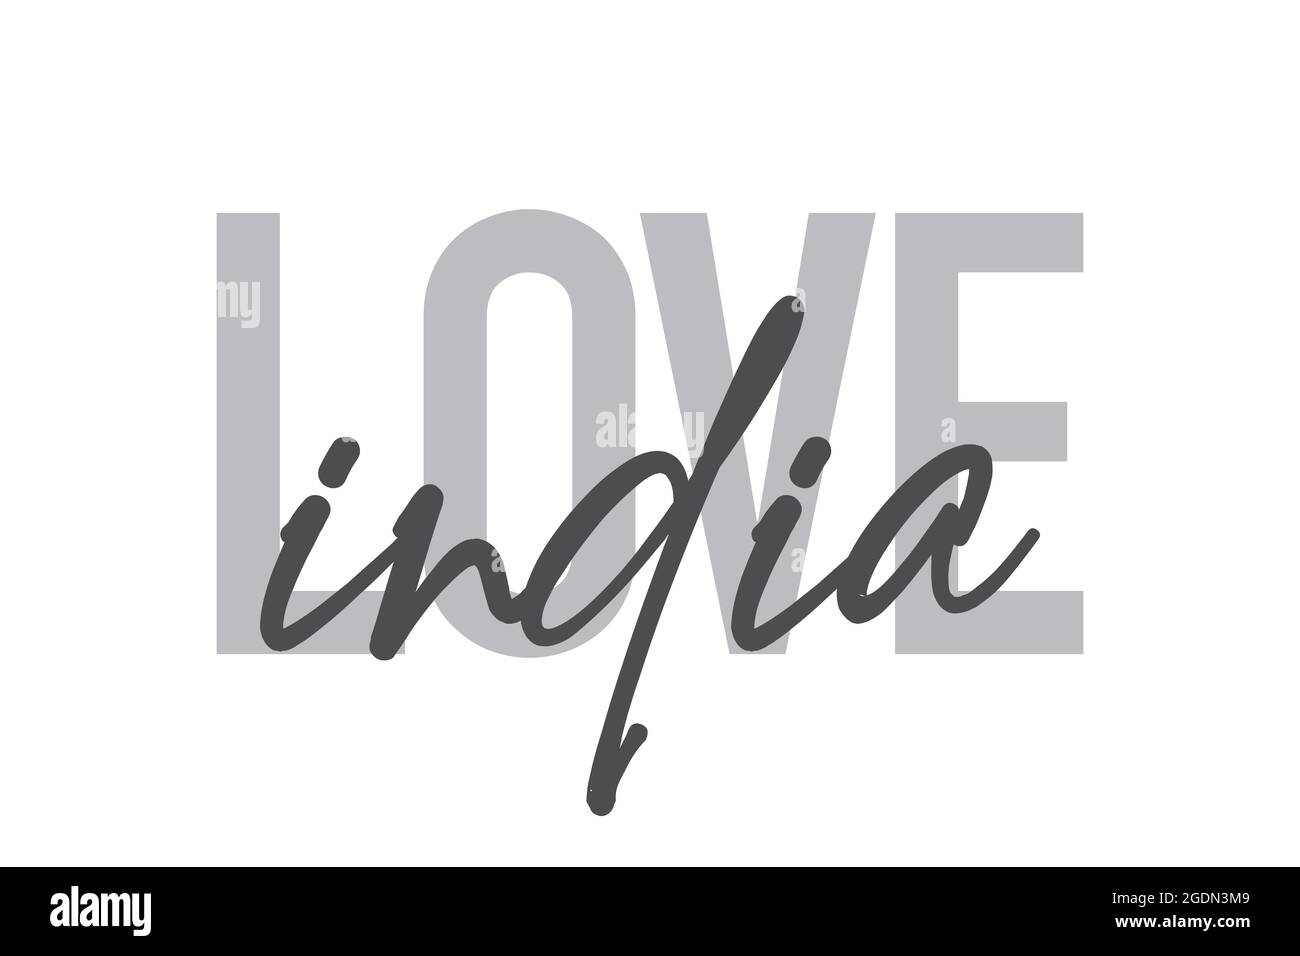 Modern, simple, minimal typographic design of a saying 'Love India' in tones of grey color. Cool, urban, trendy and playful graphic vector art with ha Stock Photo